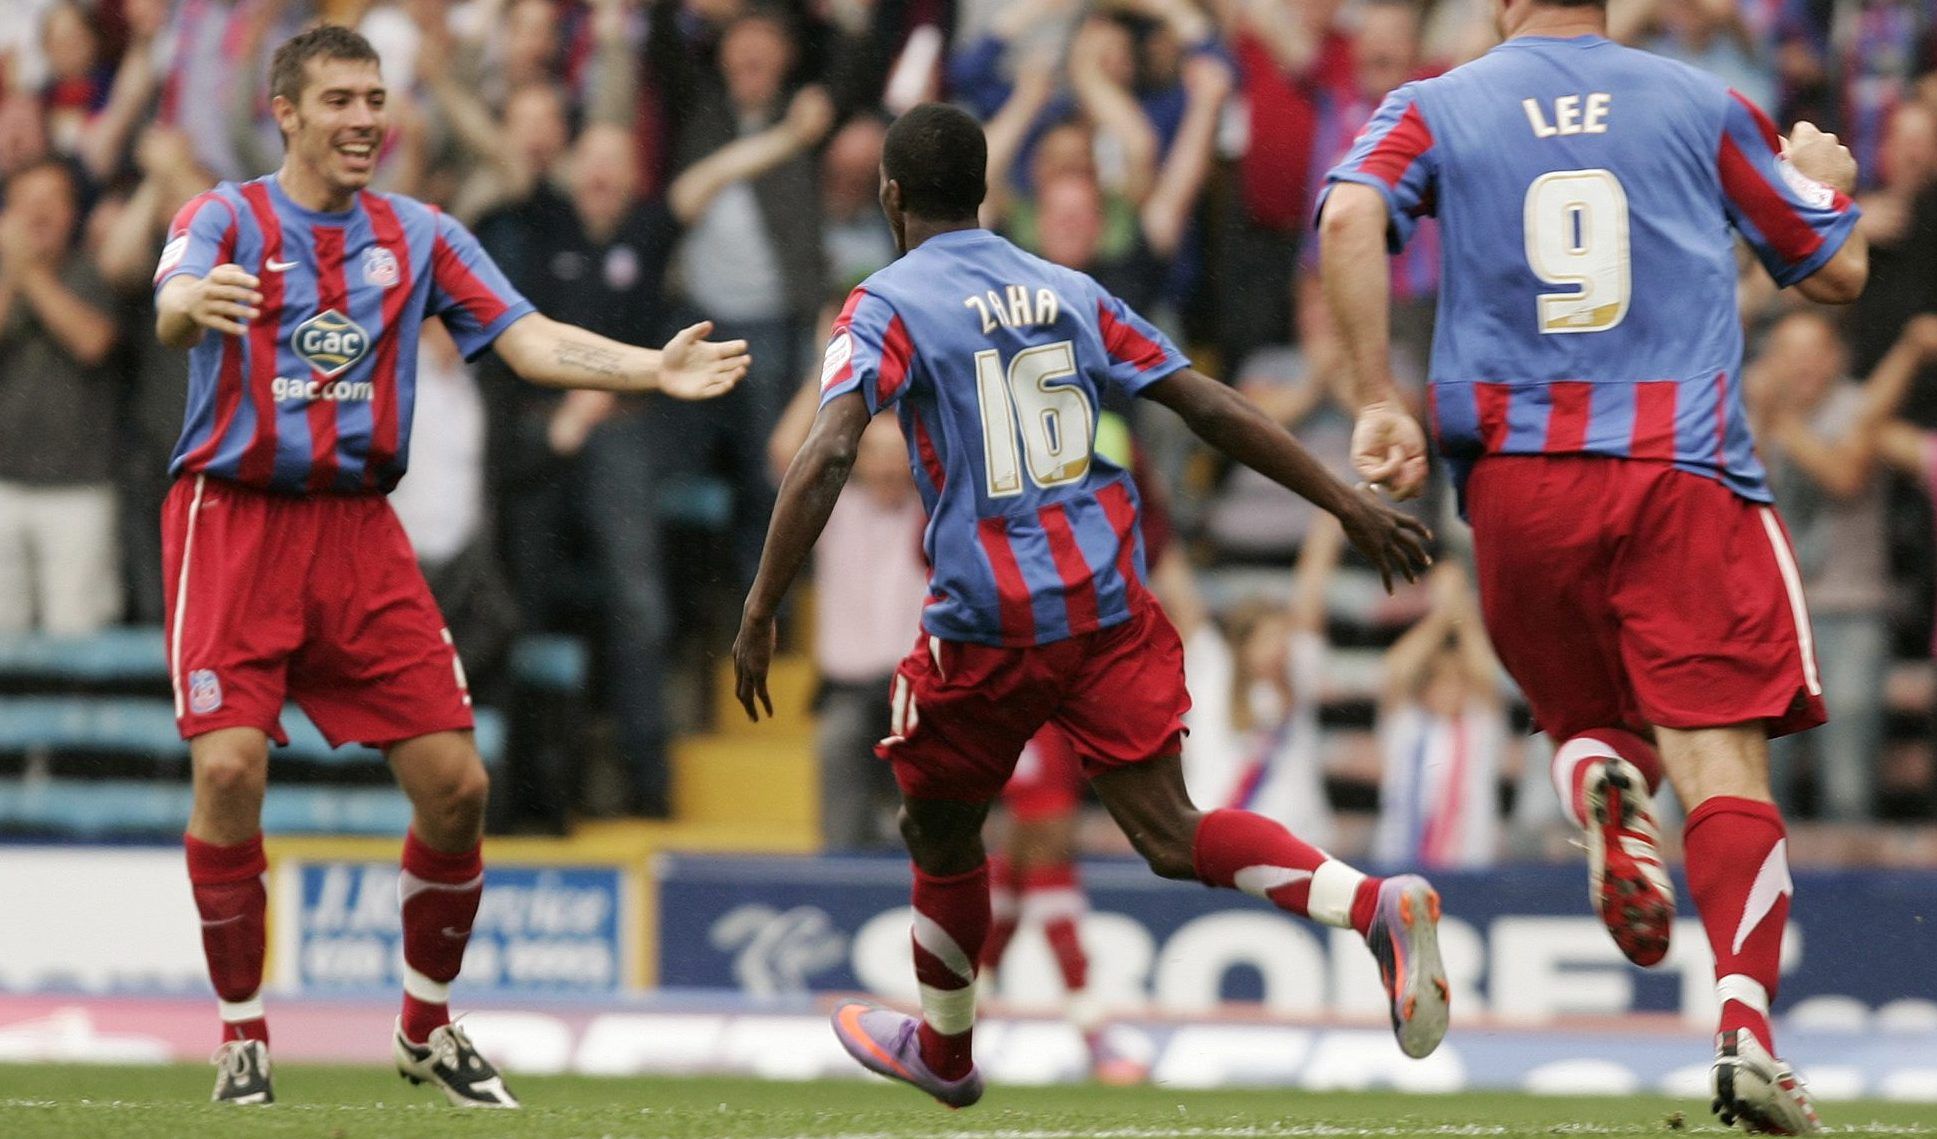 Football - Crystal Palace v Leicester City npower Football League Championship  - Selhurst Park - 10/11 - 7/8/10 
Wilfred Zaha (C) celebrates scoring the first goal for Crystal Palace with Darren Ambrose  (L) 
Mandatory Credit: Action Images / Frances Leader 
Livepic